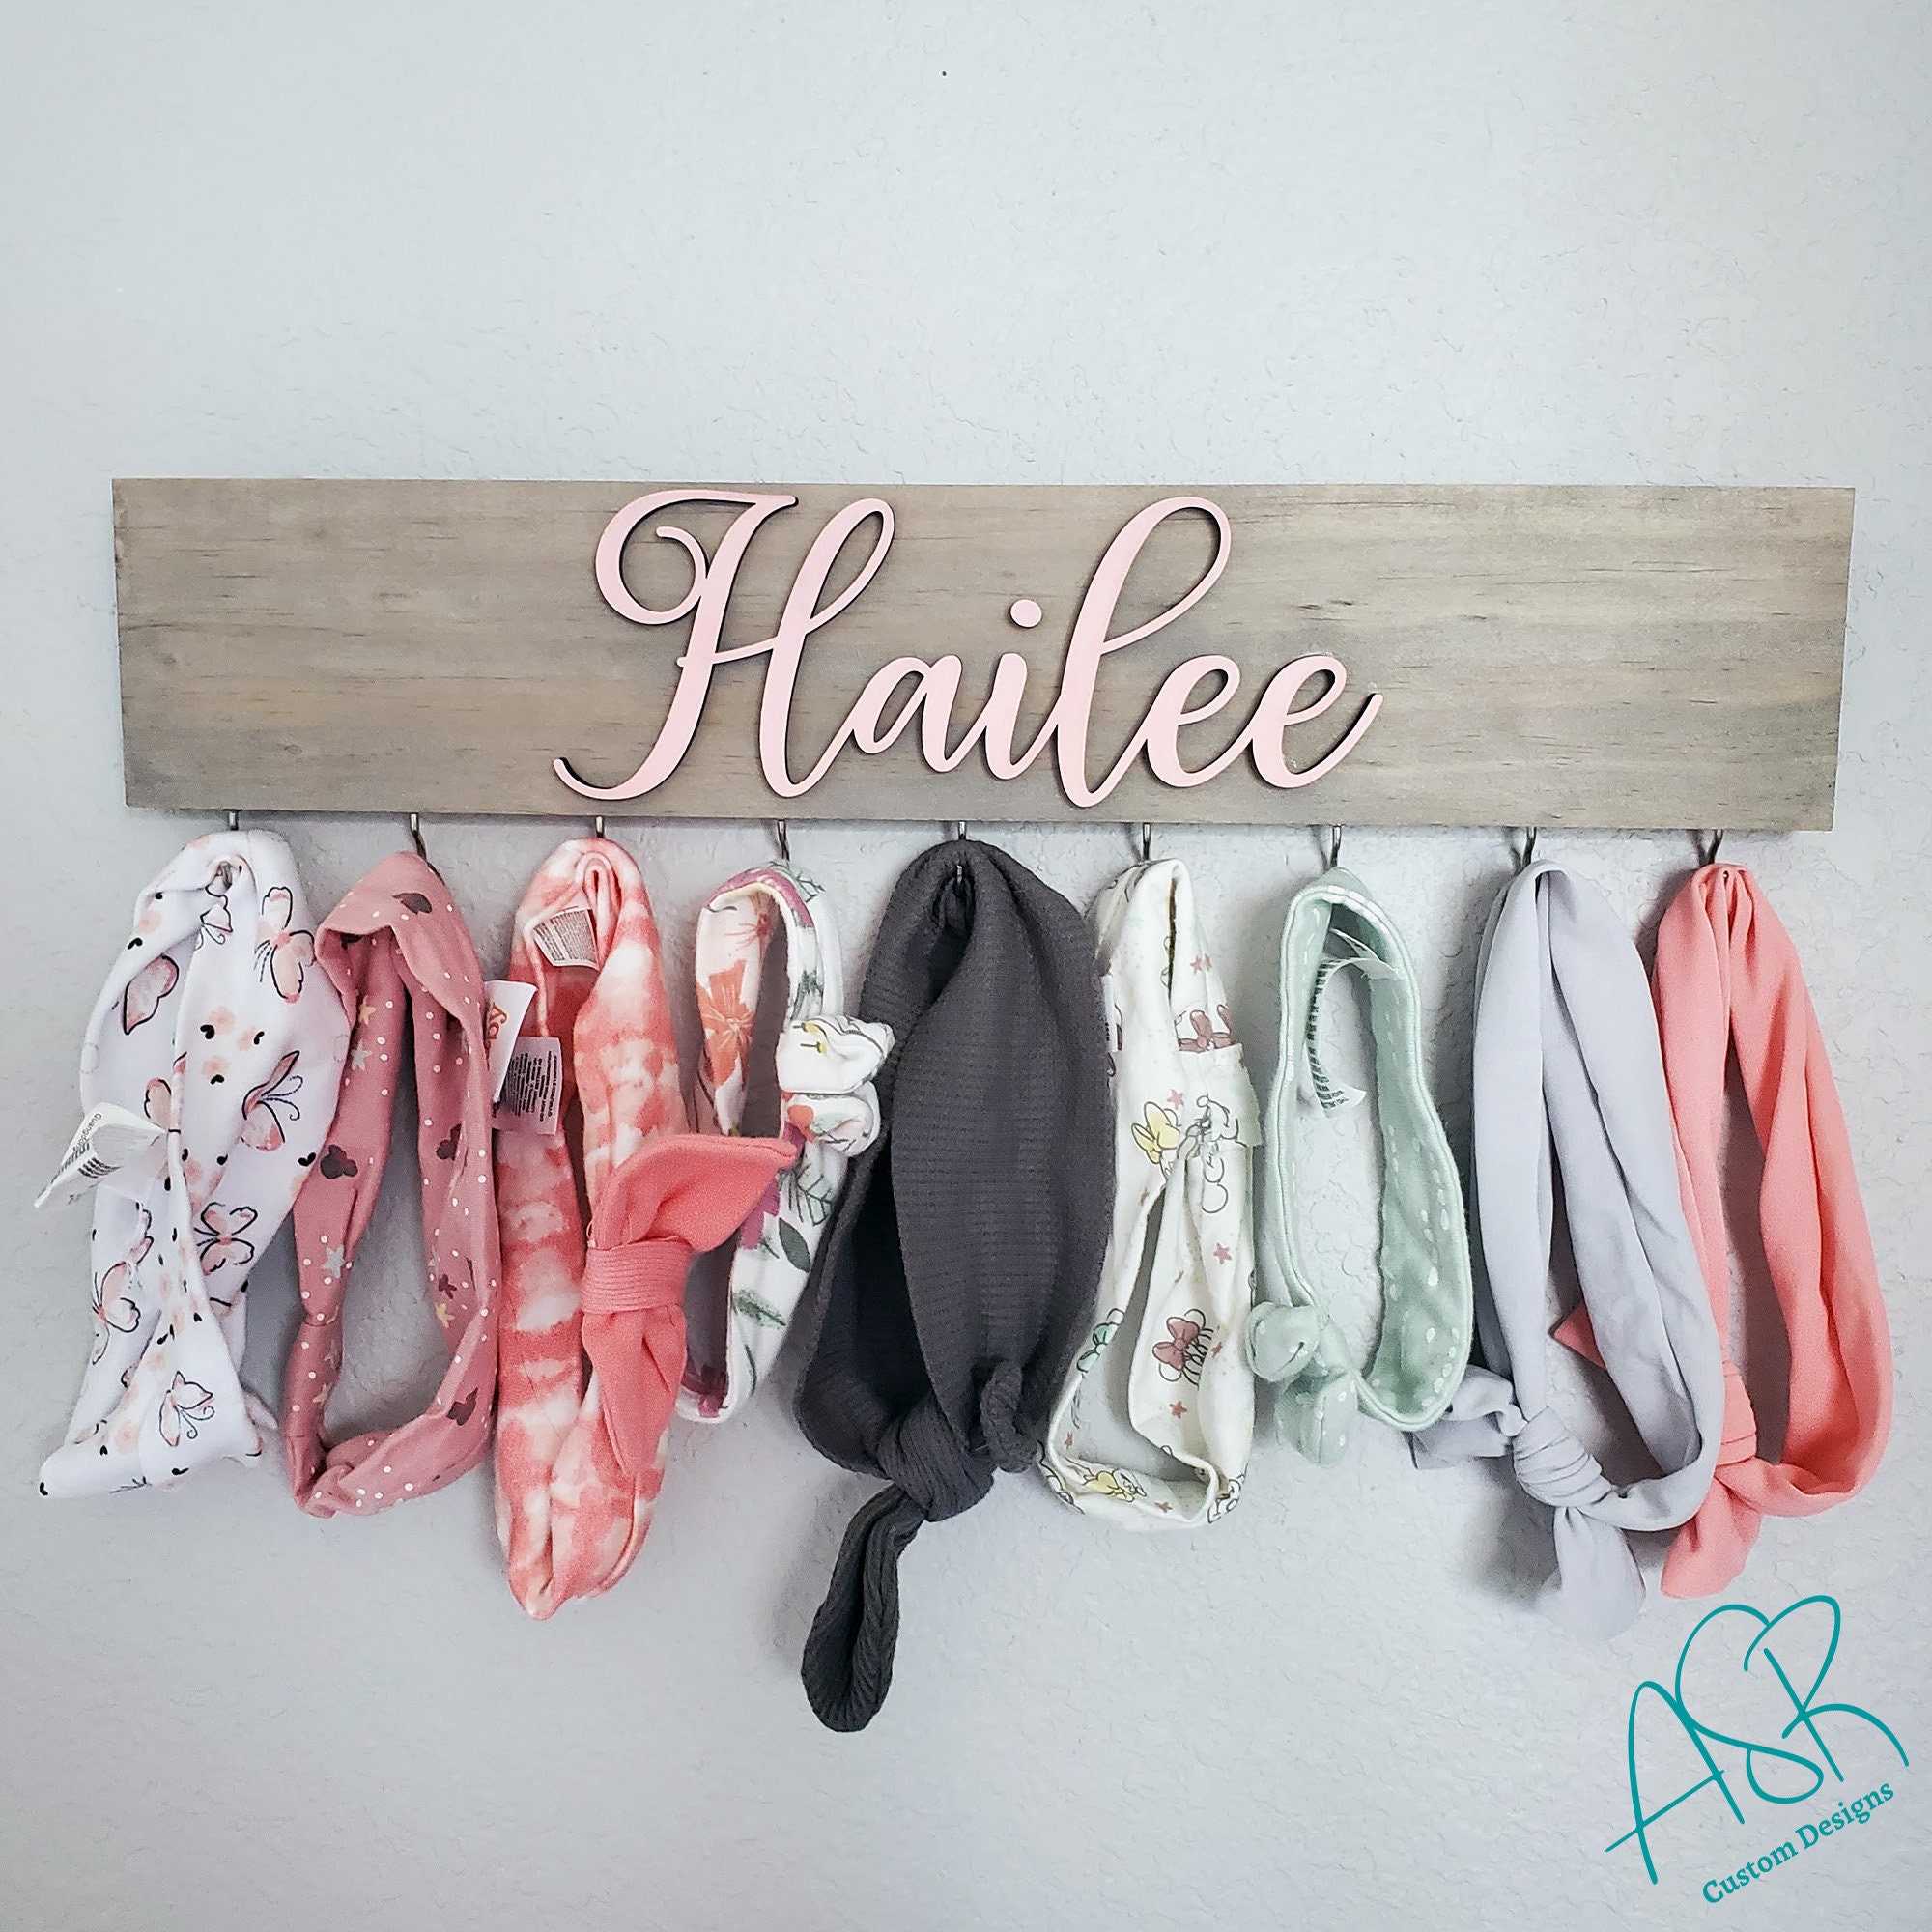  Hair Bow Holder for Walls, Hooks for Headbands and Jewelry,  Personalized Hair Bow Holder, Farmhouse Decor, Rustic Baby Nursery,  Personalized Baby Shower Gift, Organizer, Hair Bow Holder : Handmade  Products